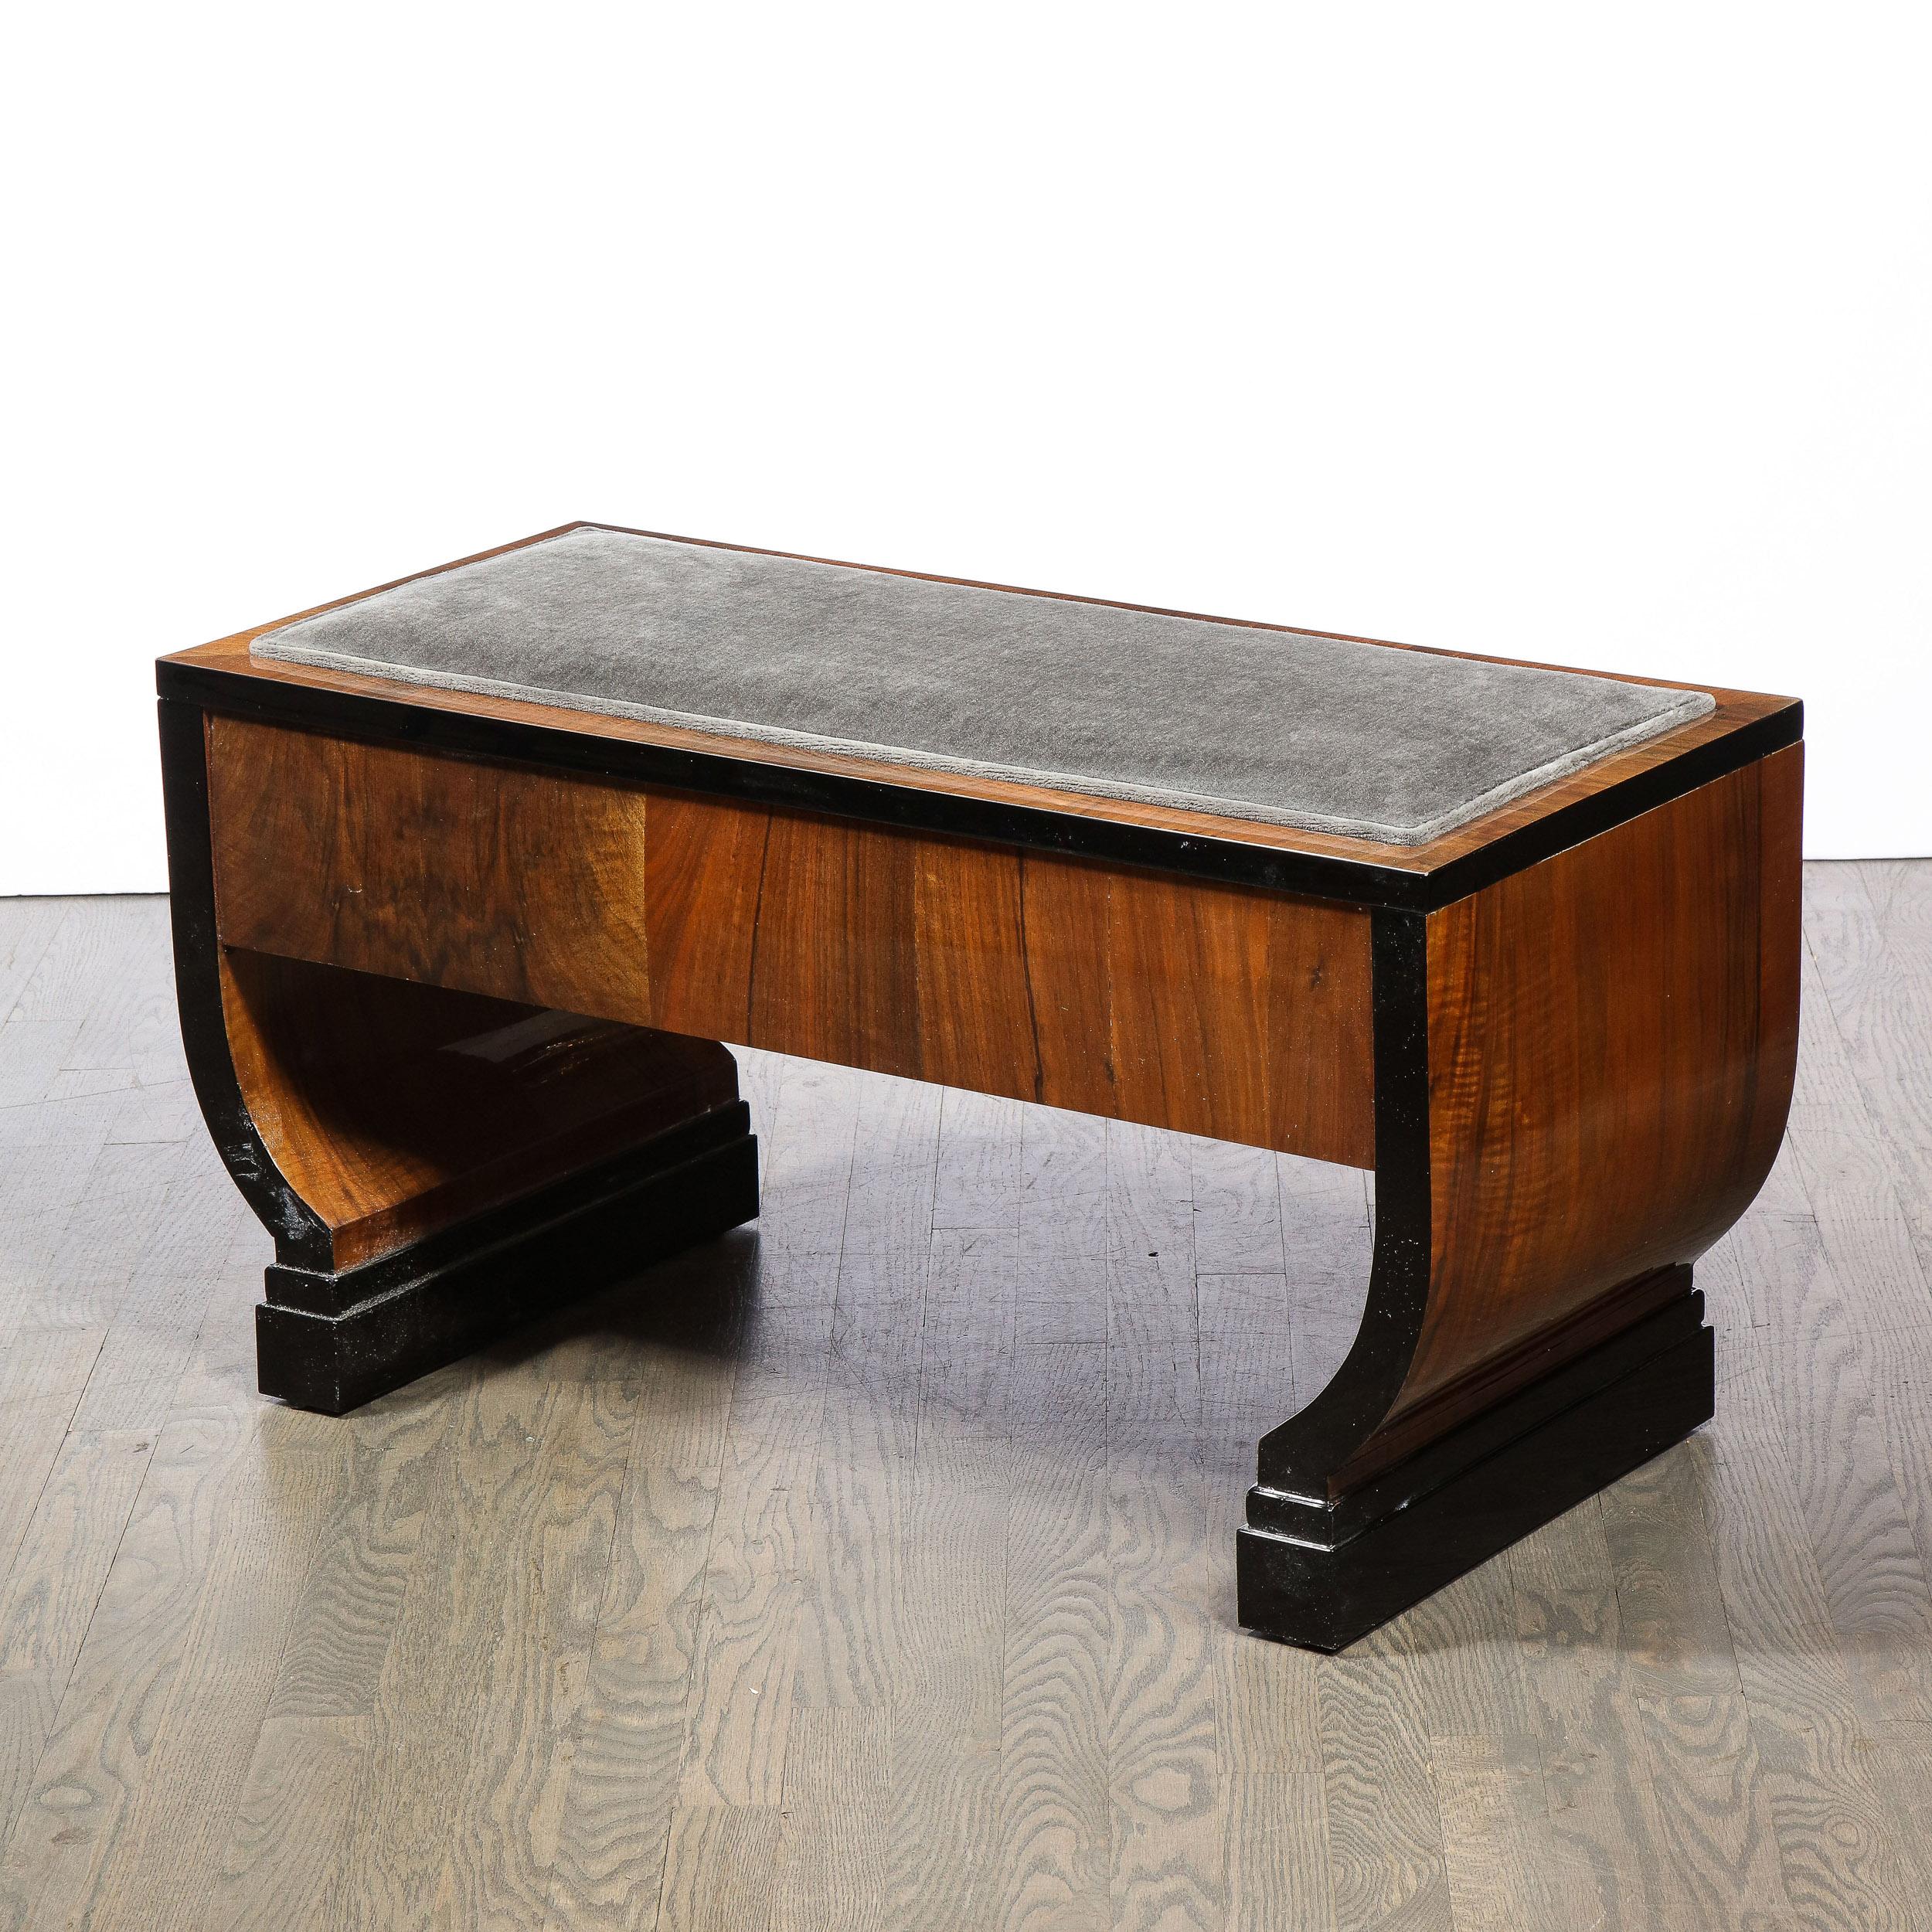 This stunning Art Deco Machine Age bench was realized in the United States circa 1935. It features skyscraper style black lacquer feet, streamlined side and a volumetric rectangular seat with lacquer accents on the edges. The seat has been newly